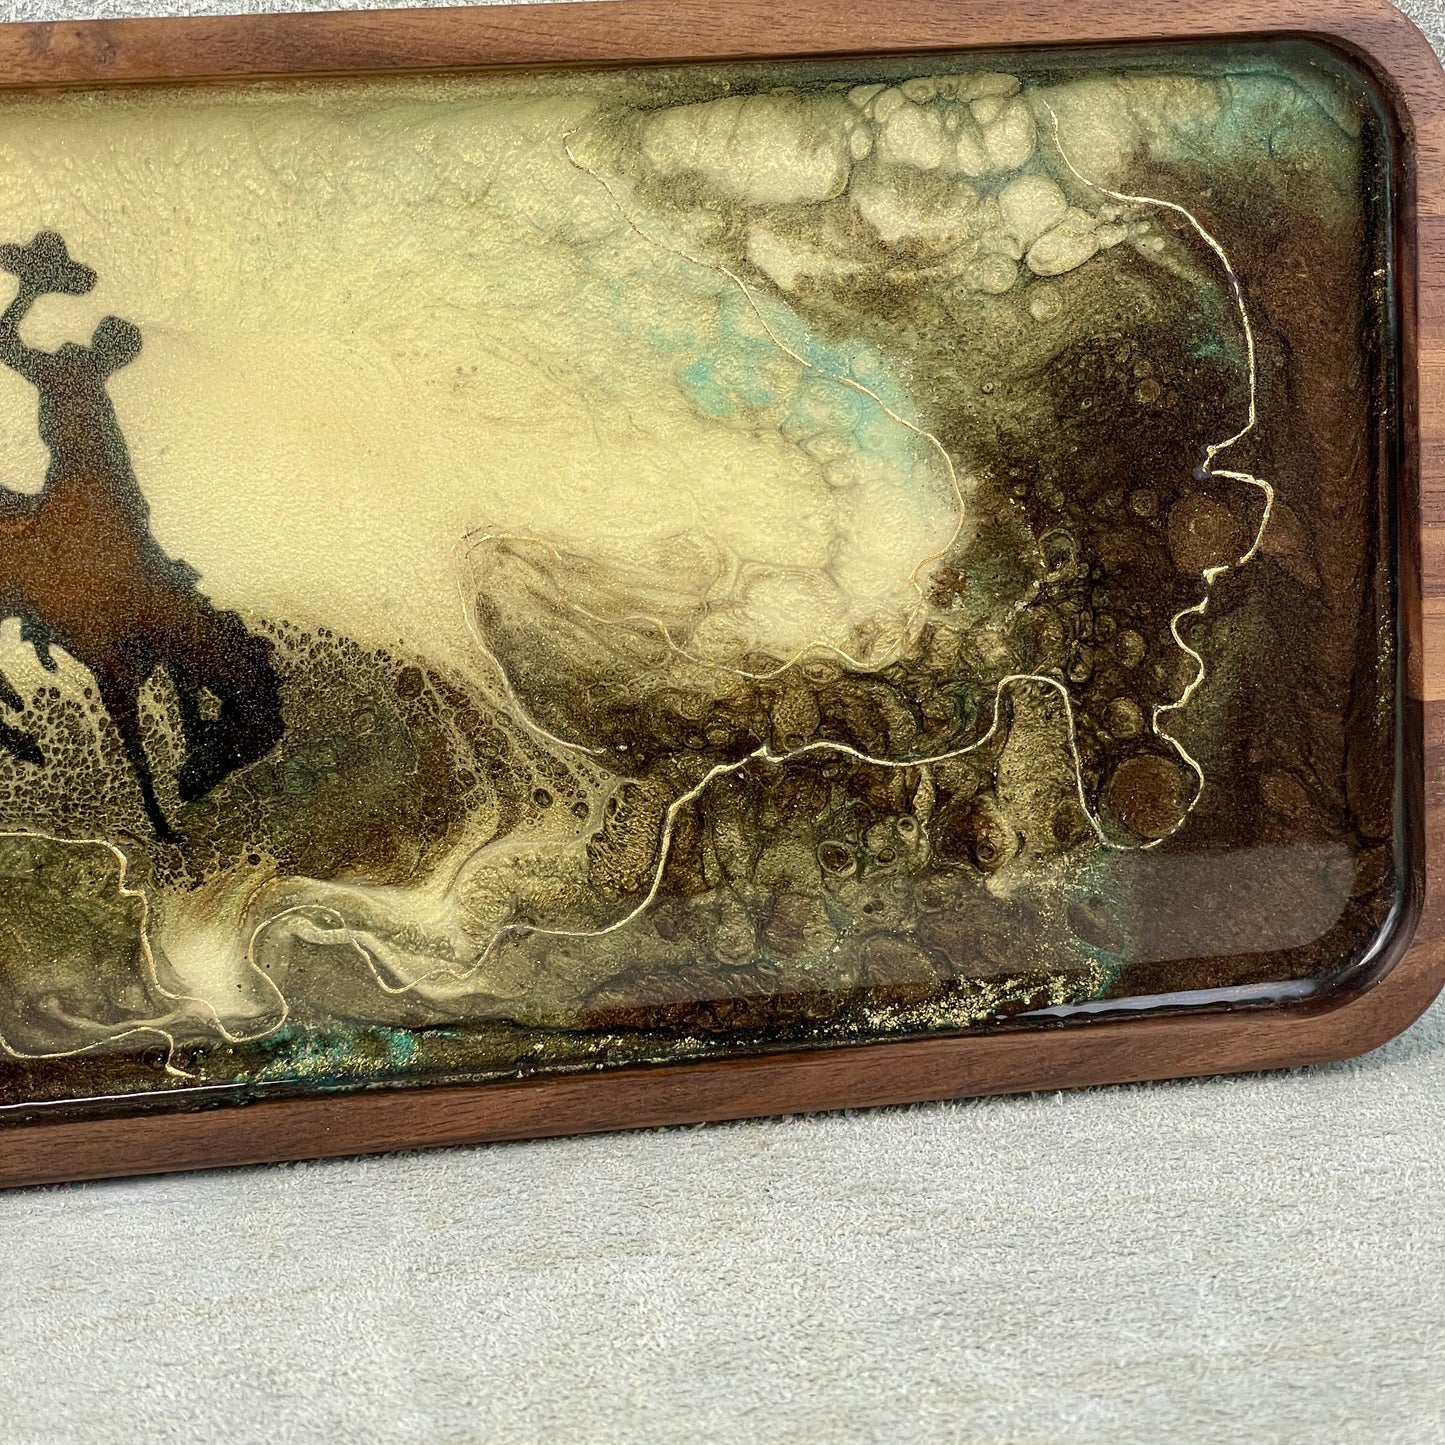 Wyoming Cowboy Walnut Wood and Resin with 24K Gold Tray